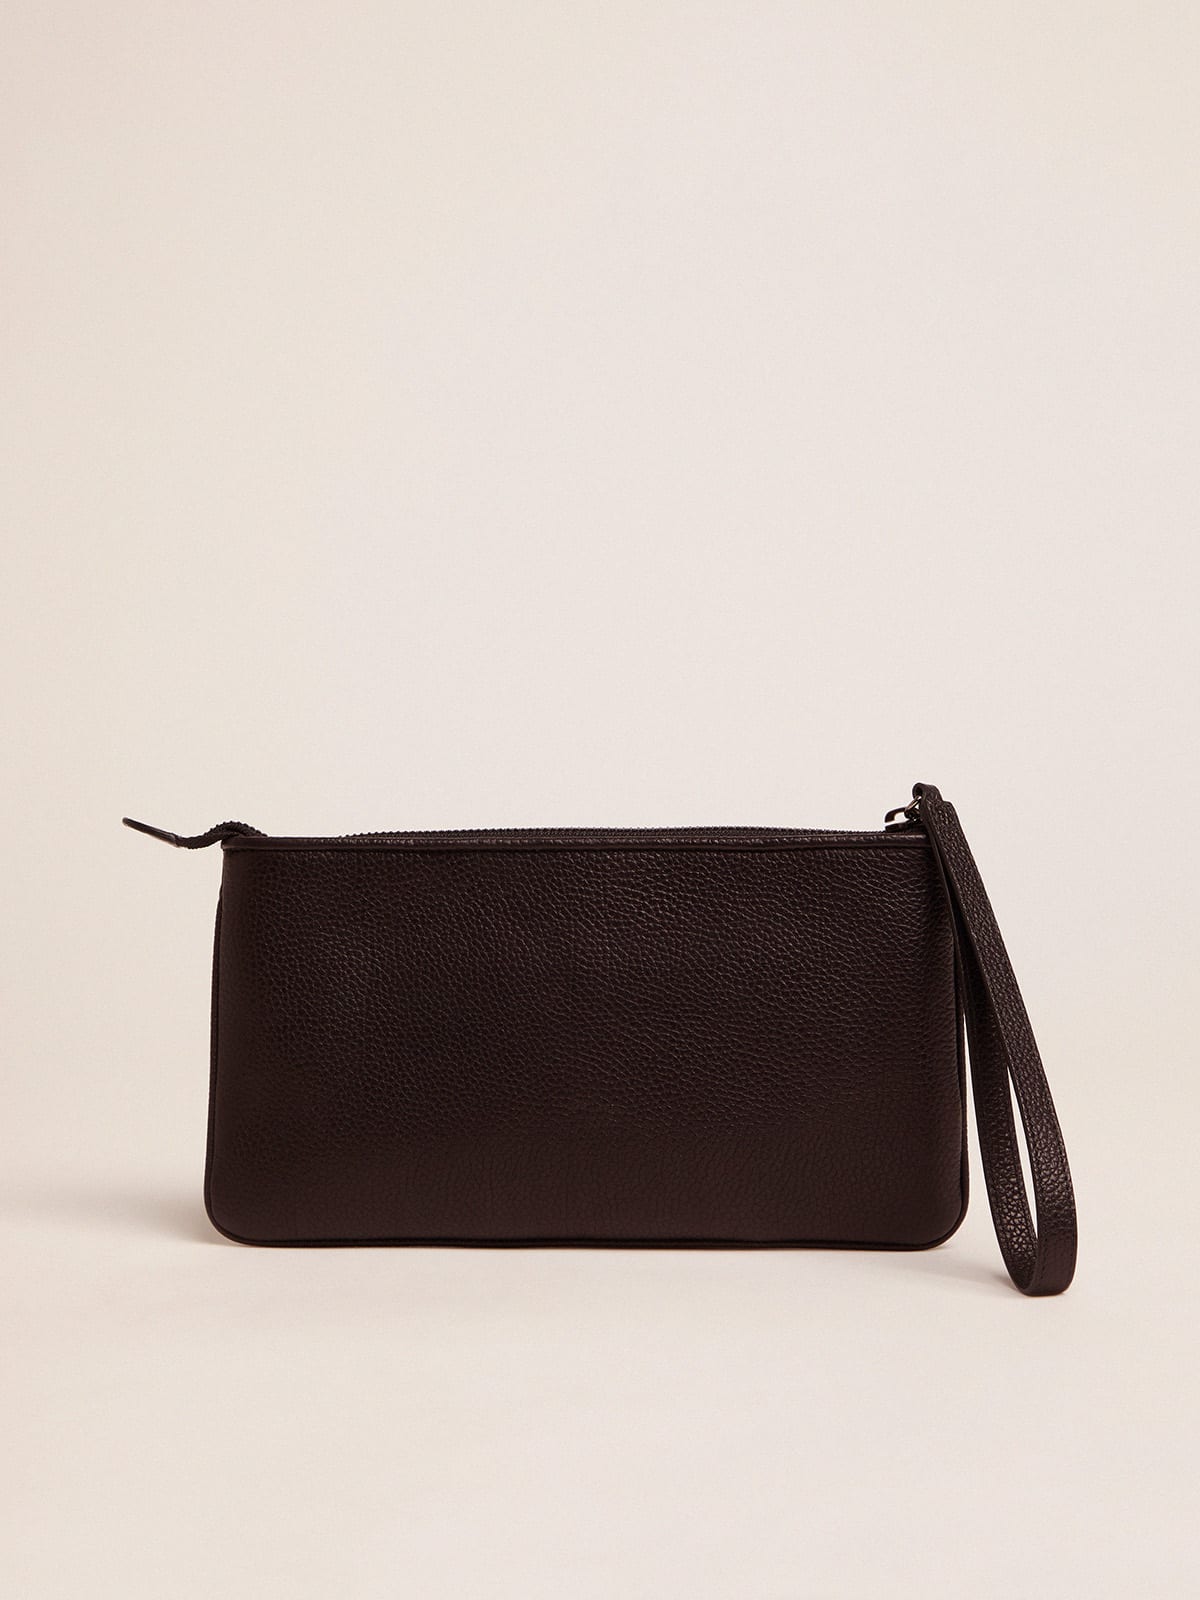 Golden Goose - Black Star Wrist clutch bag in grained leather in 